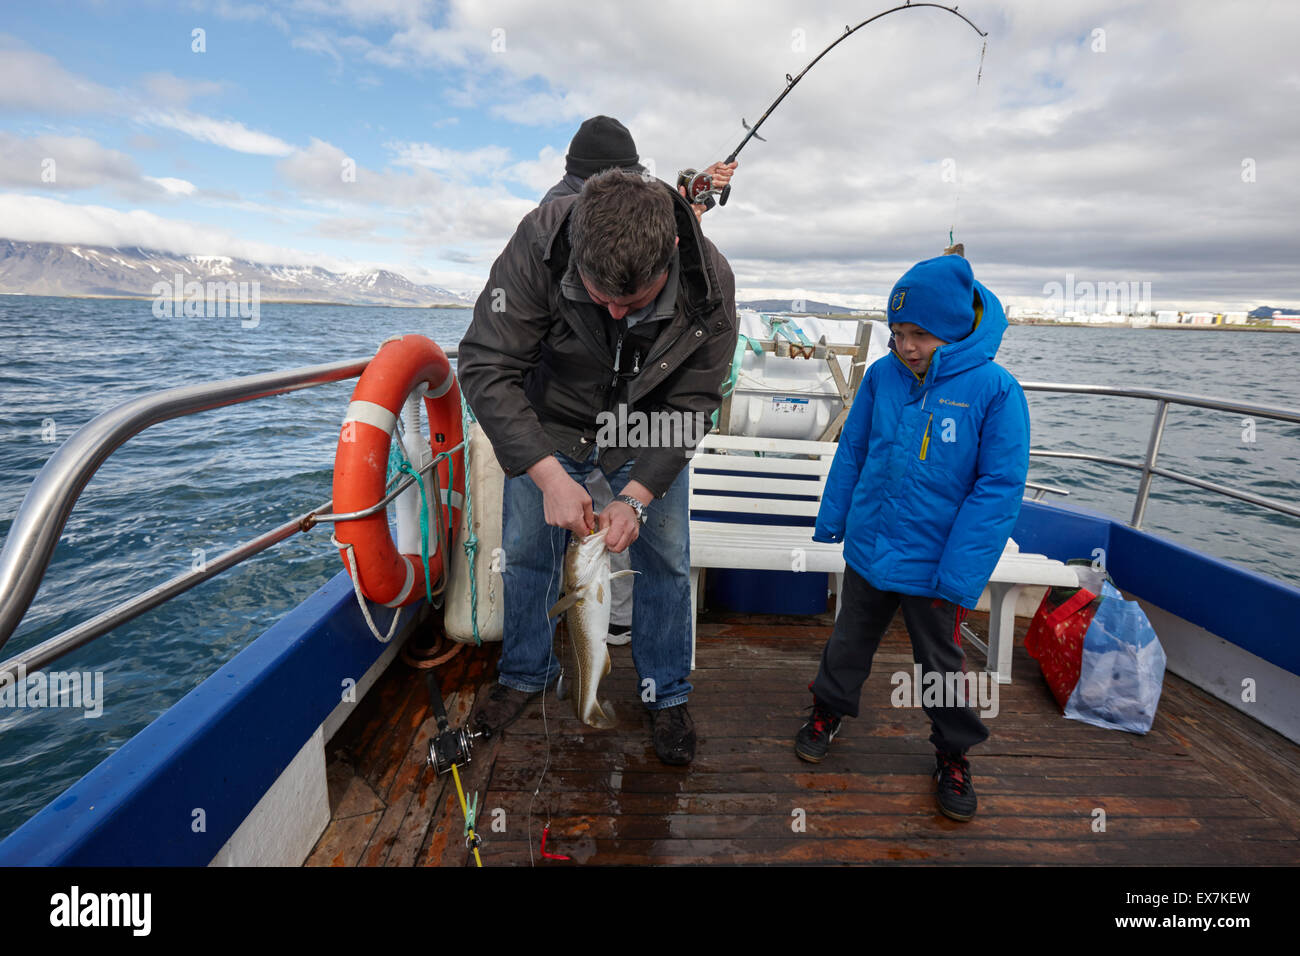 men seafishing catching fish with young boy on a charter boat Reykjavik iceland Stock Photo